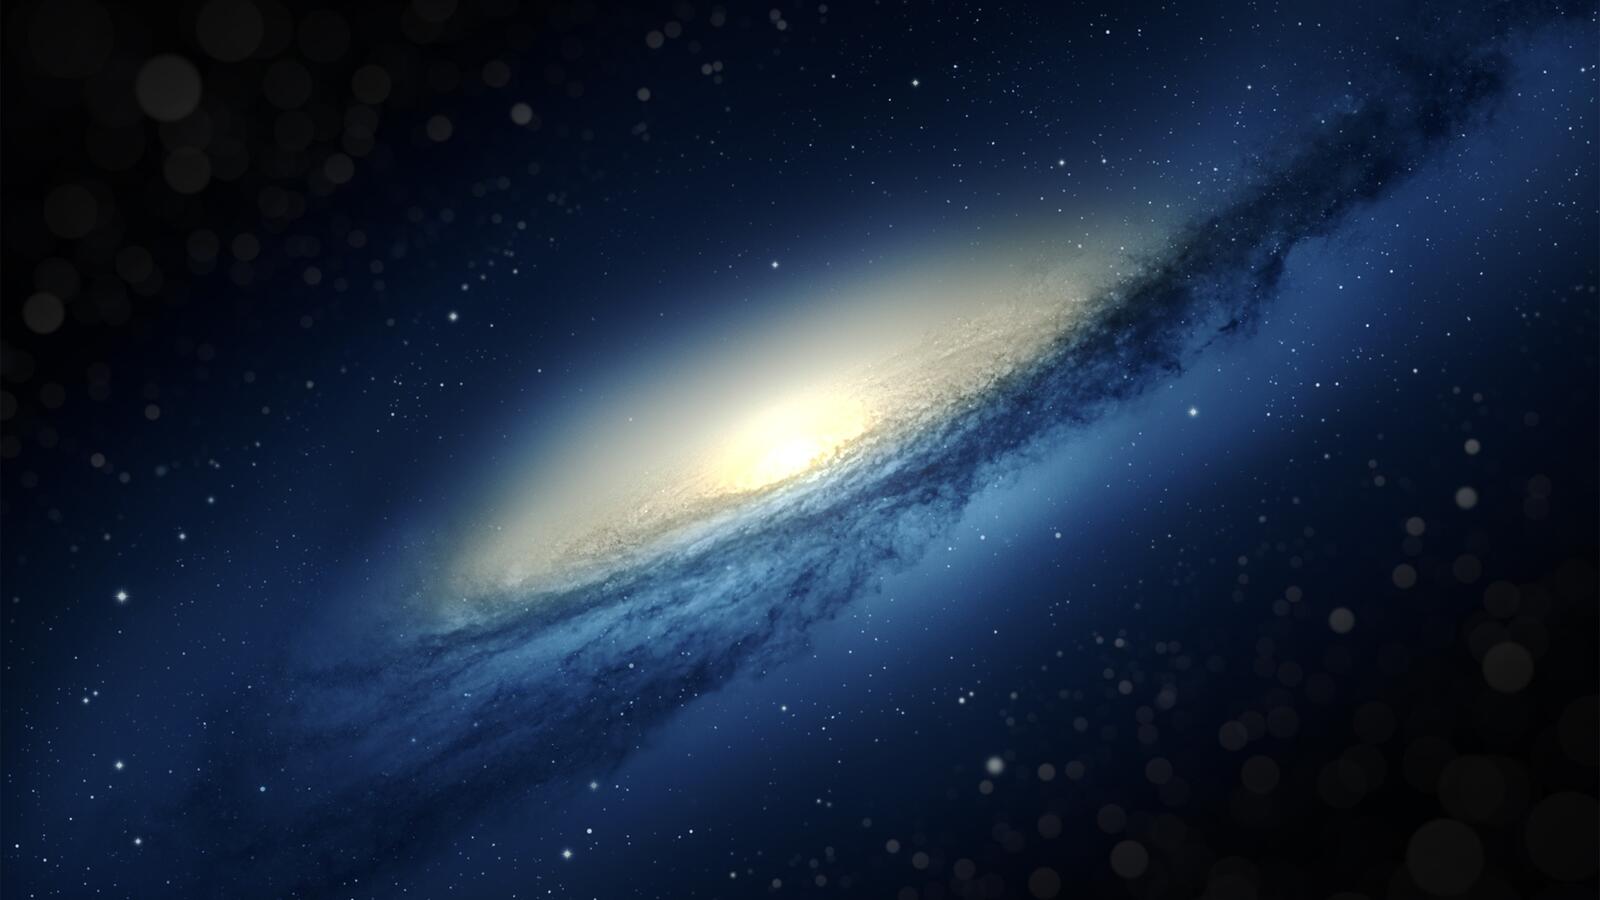 Wallpapers glow the center of the galaxy nebula on the desktop